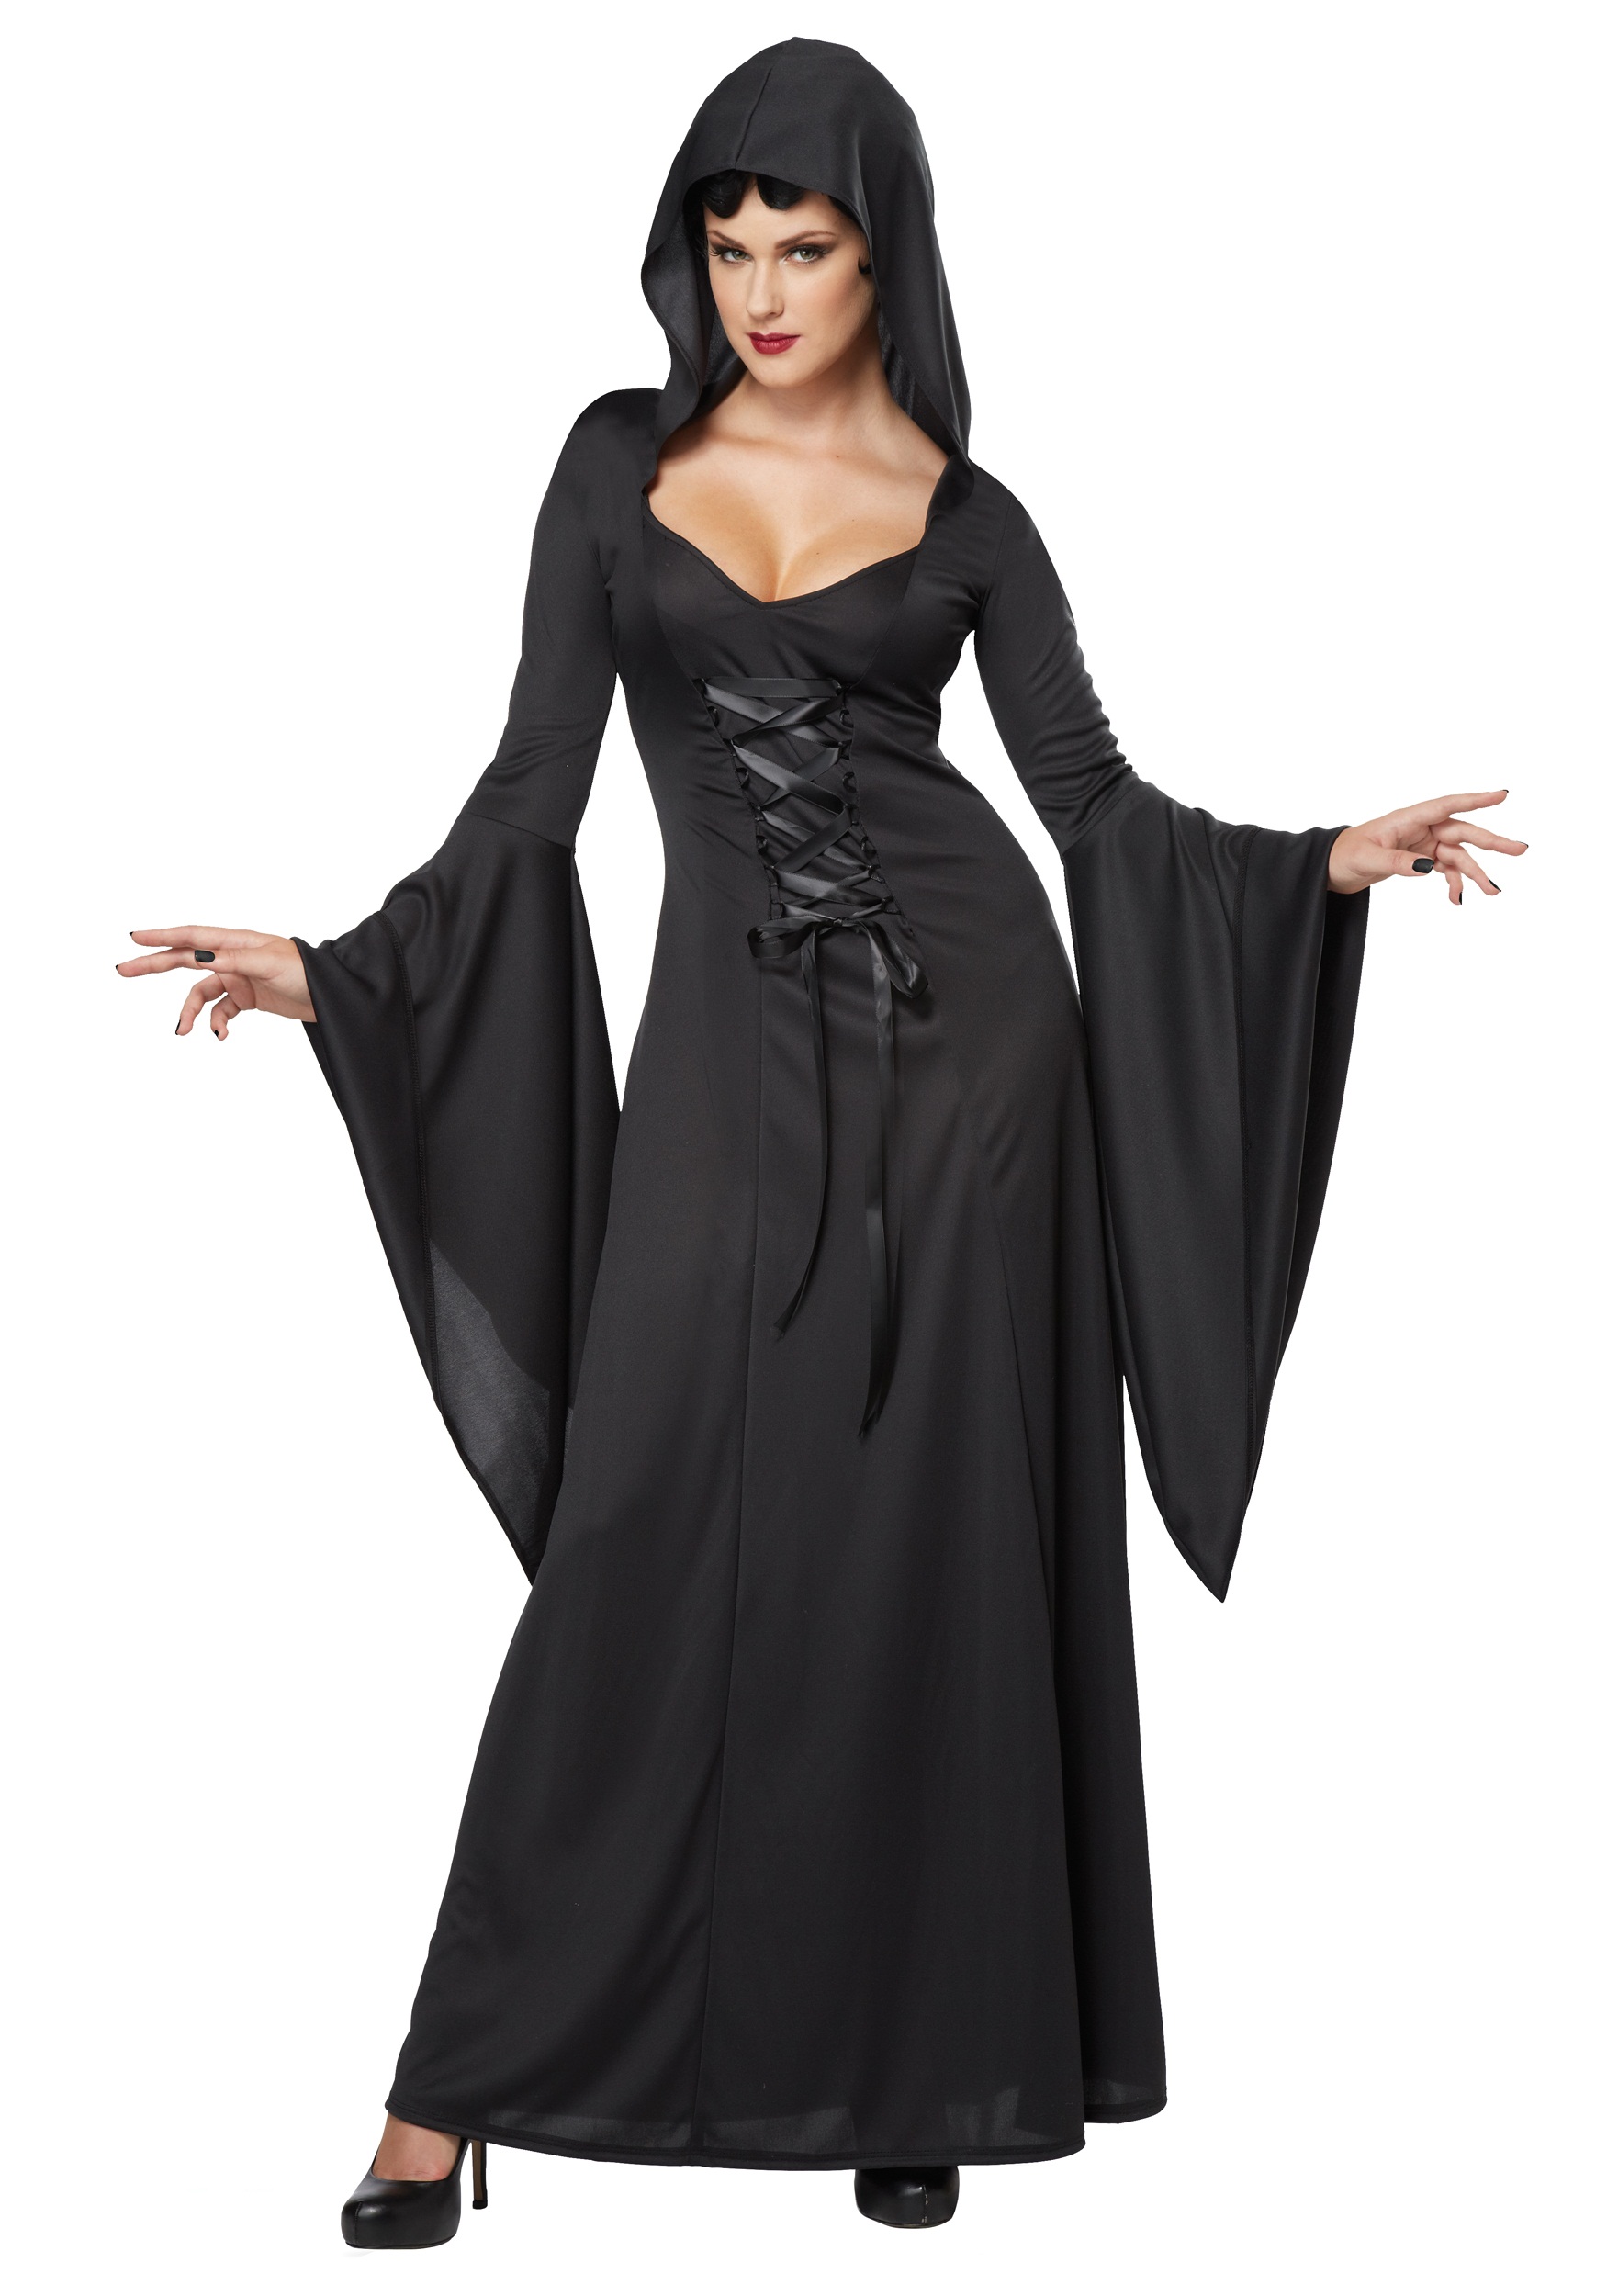 Women’s Hooded Black Lace Up Robe Costume